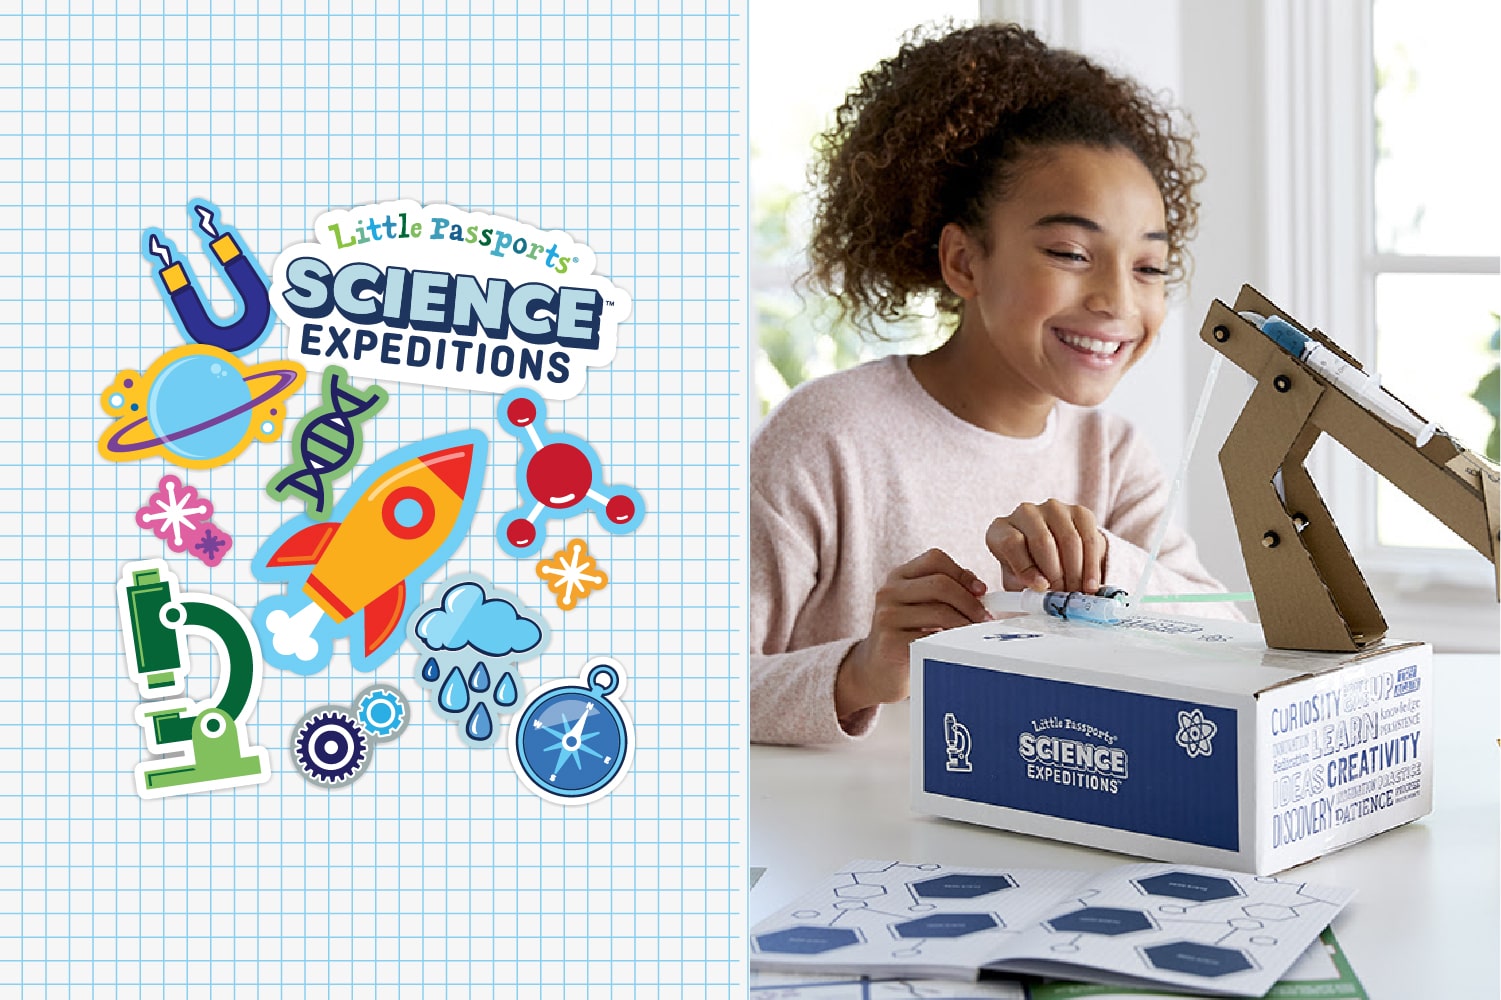 Little Passports Science Expeditions shipping box and stickers.